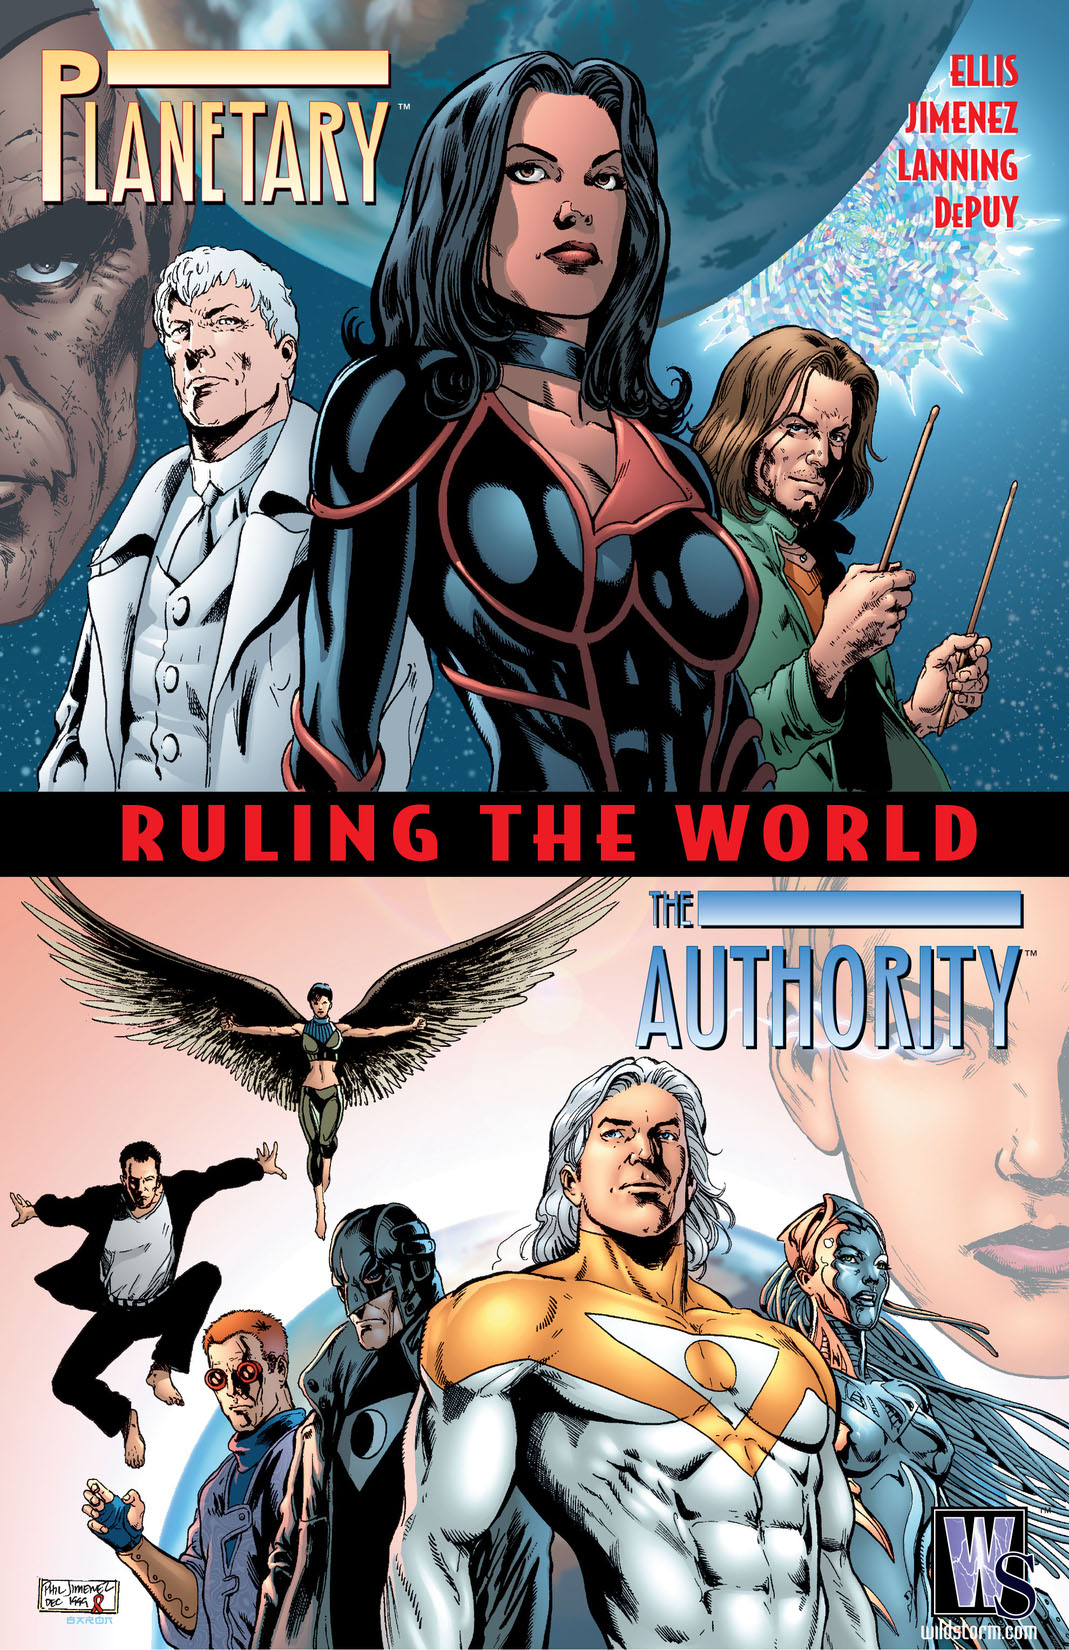 Planetary/Authority #1 preview images